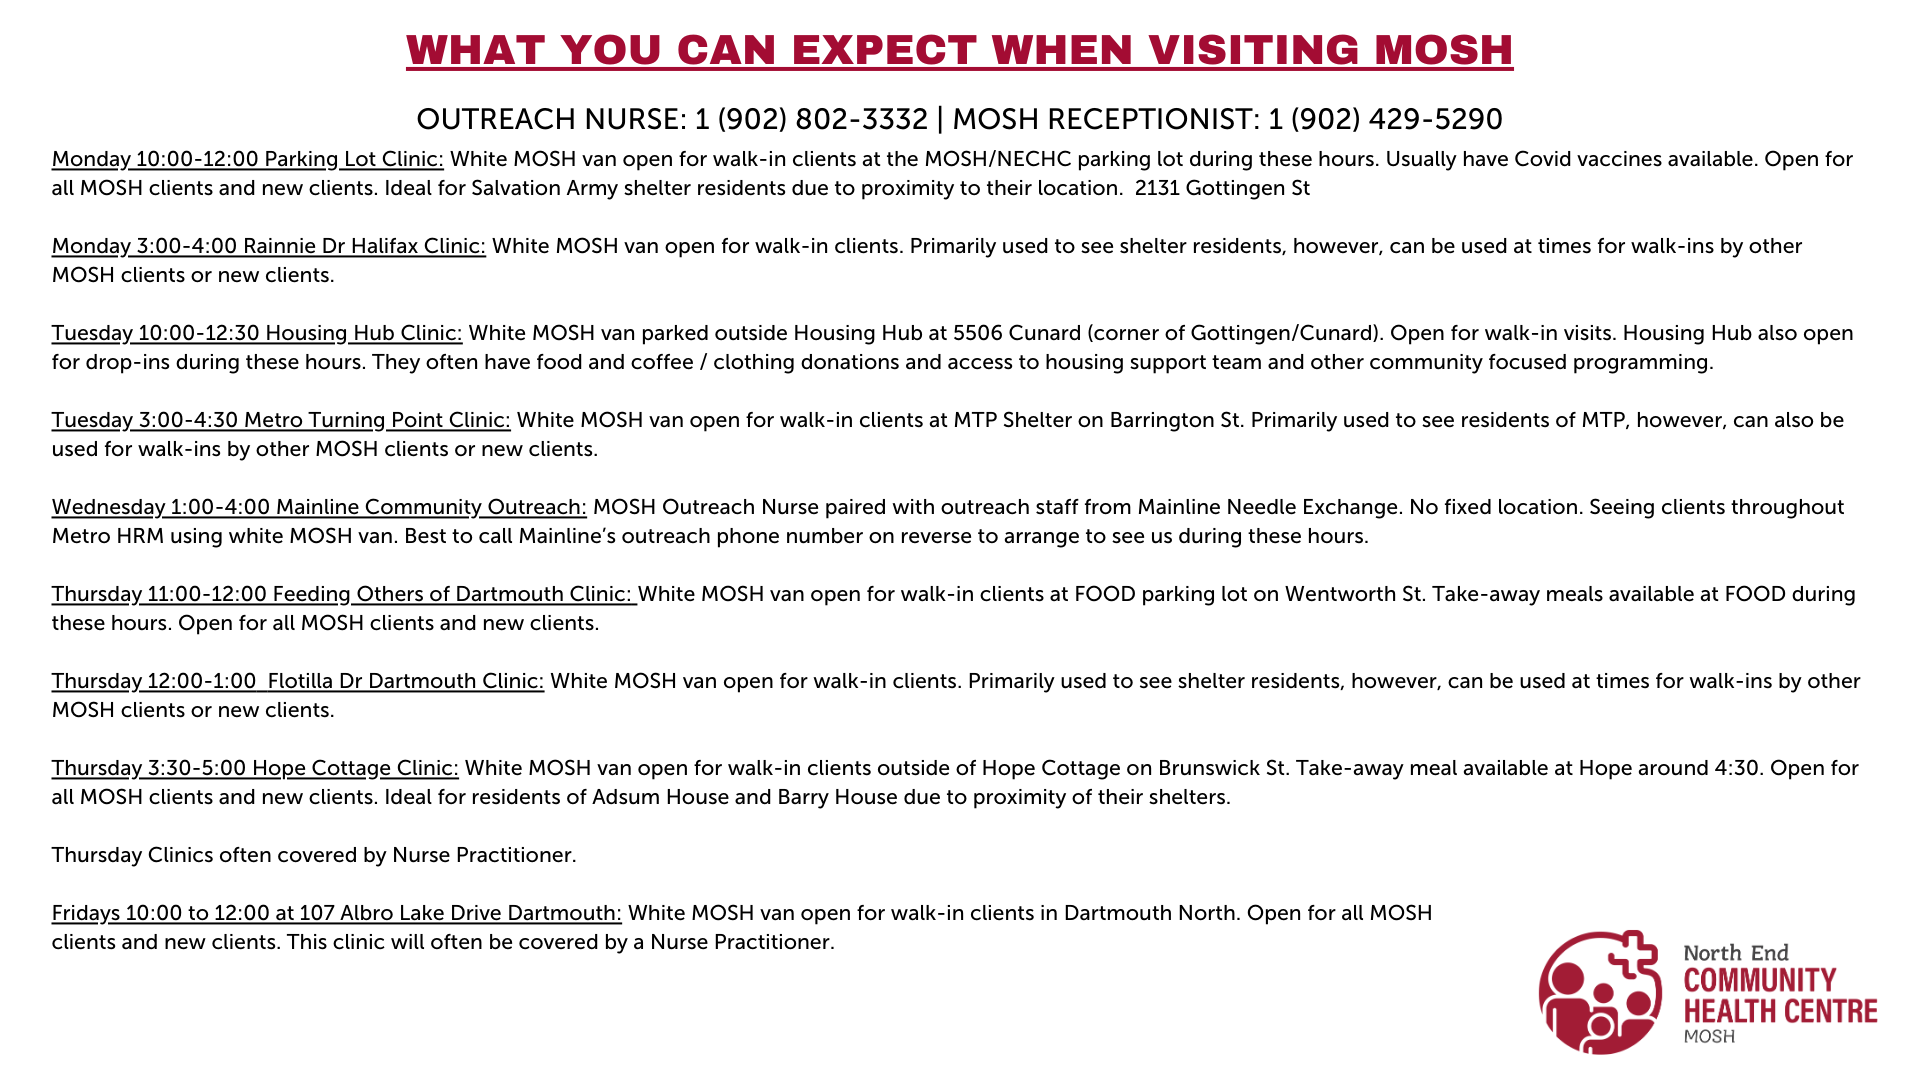 What to expect when visiting MOSH